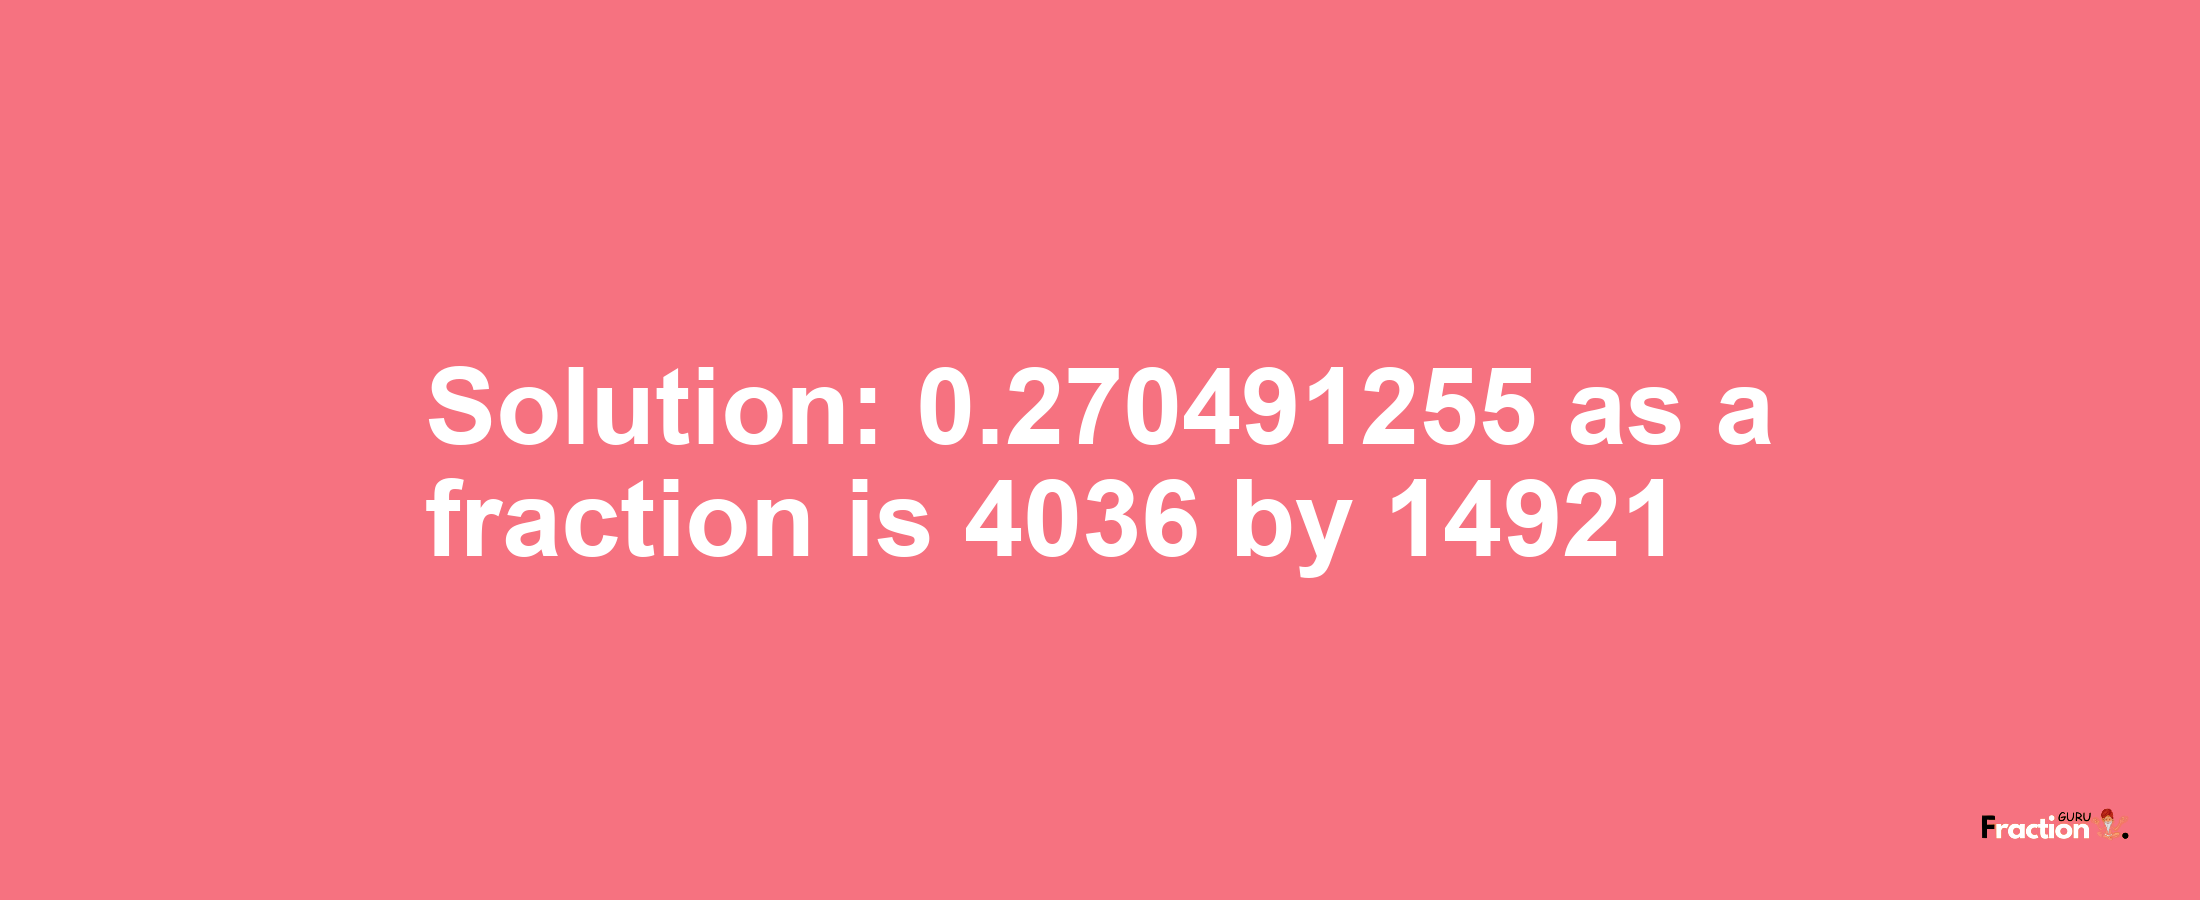 Solution:0.270491255 as a fraction is 4036/14921